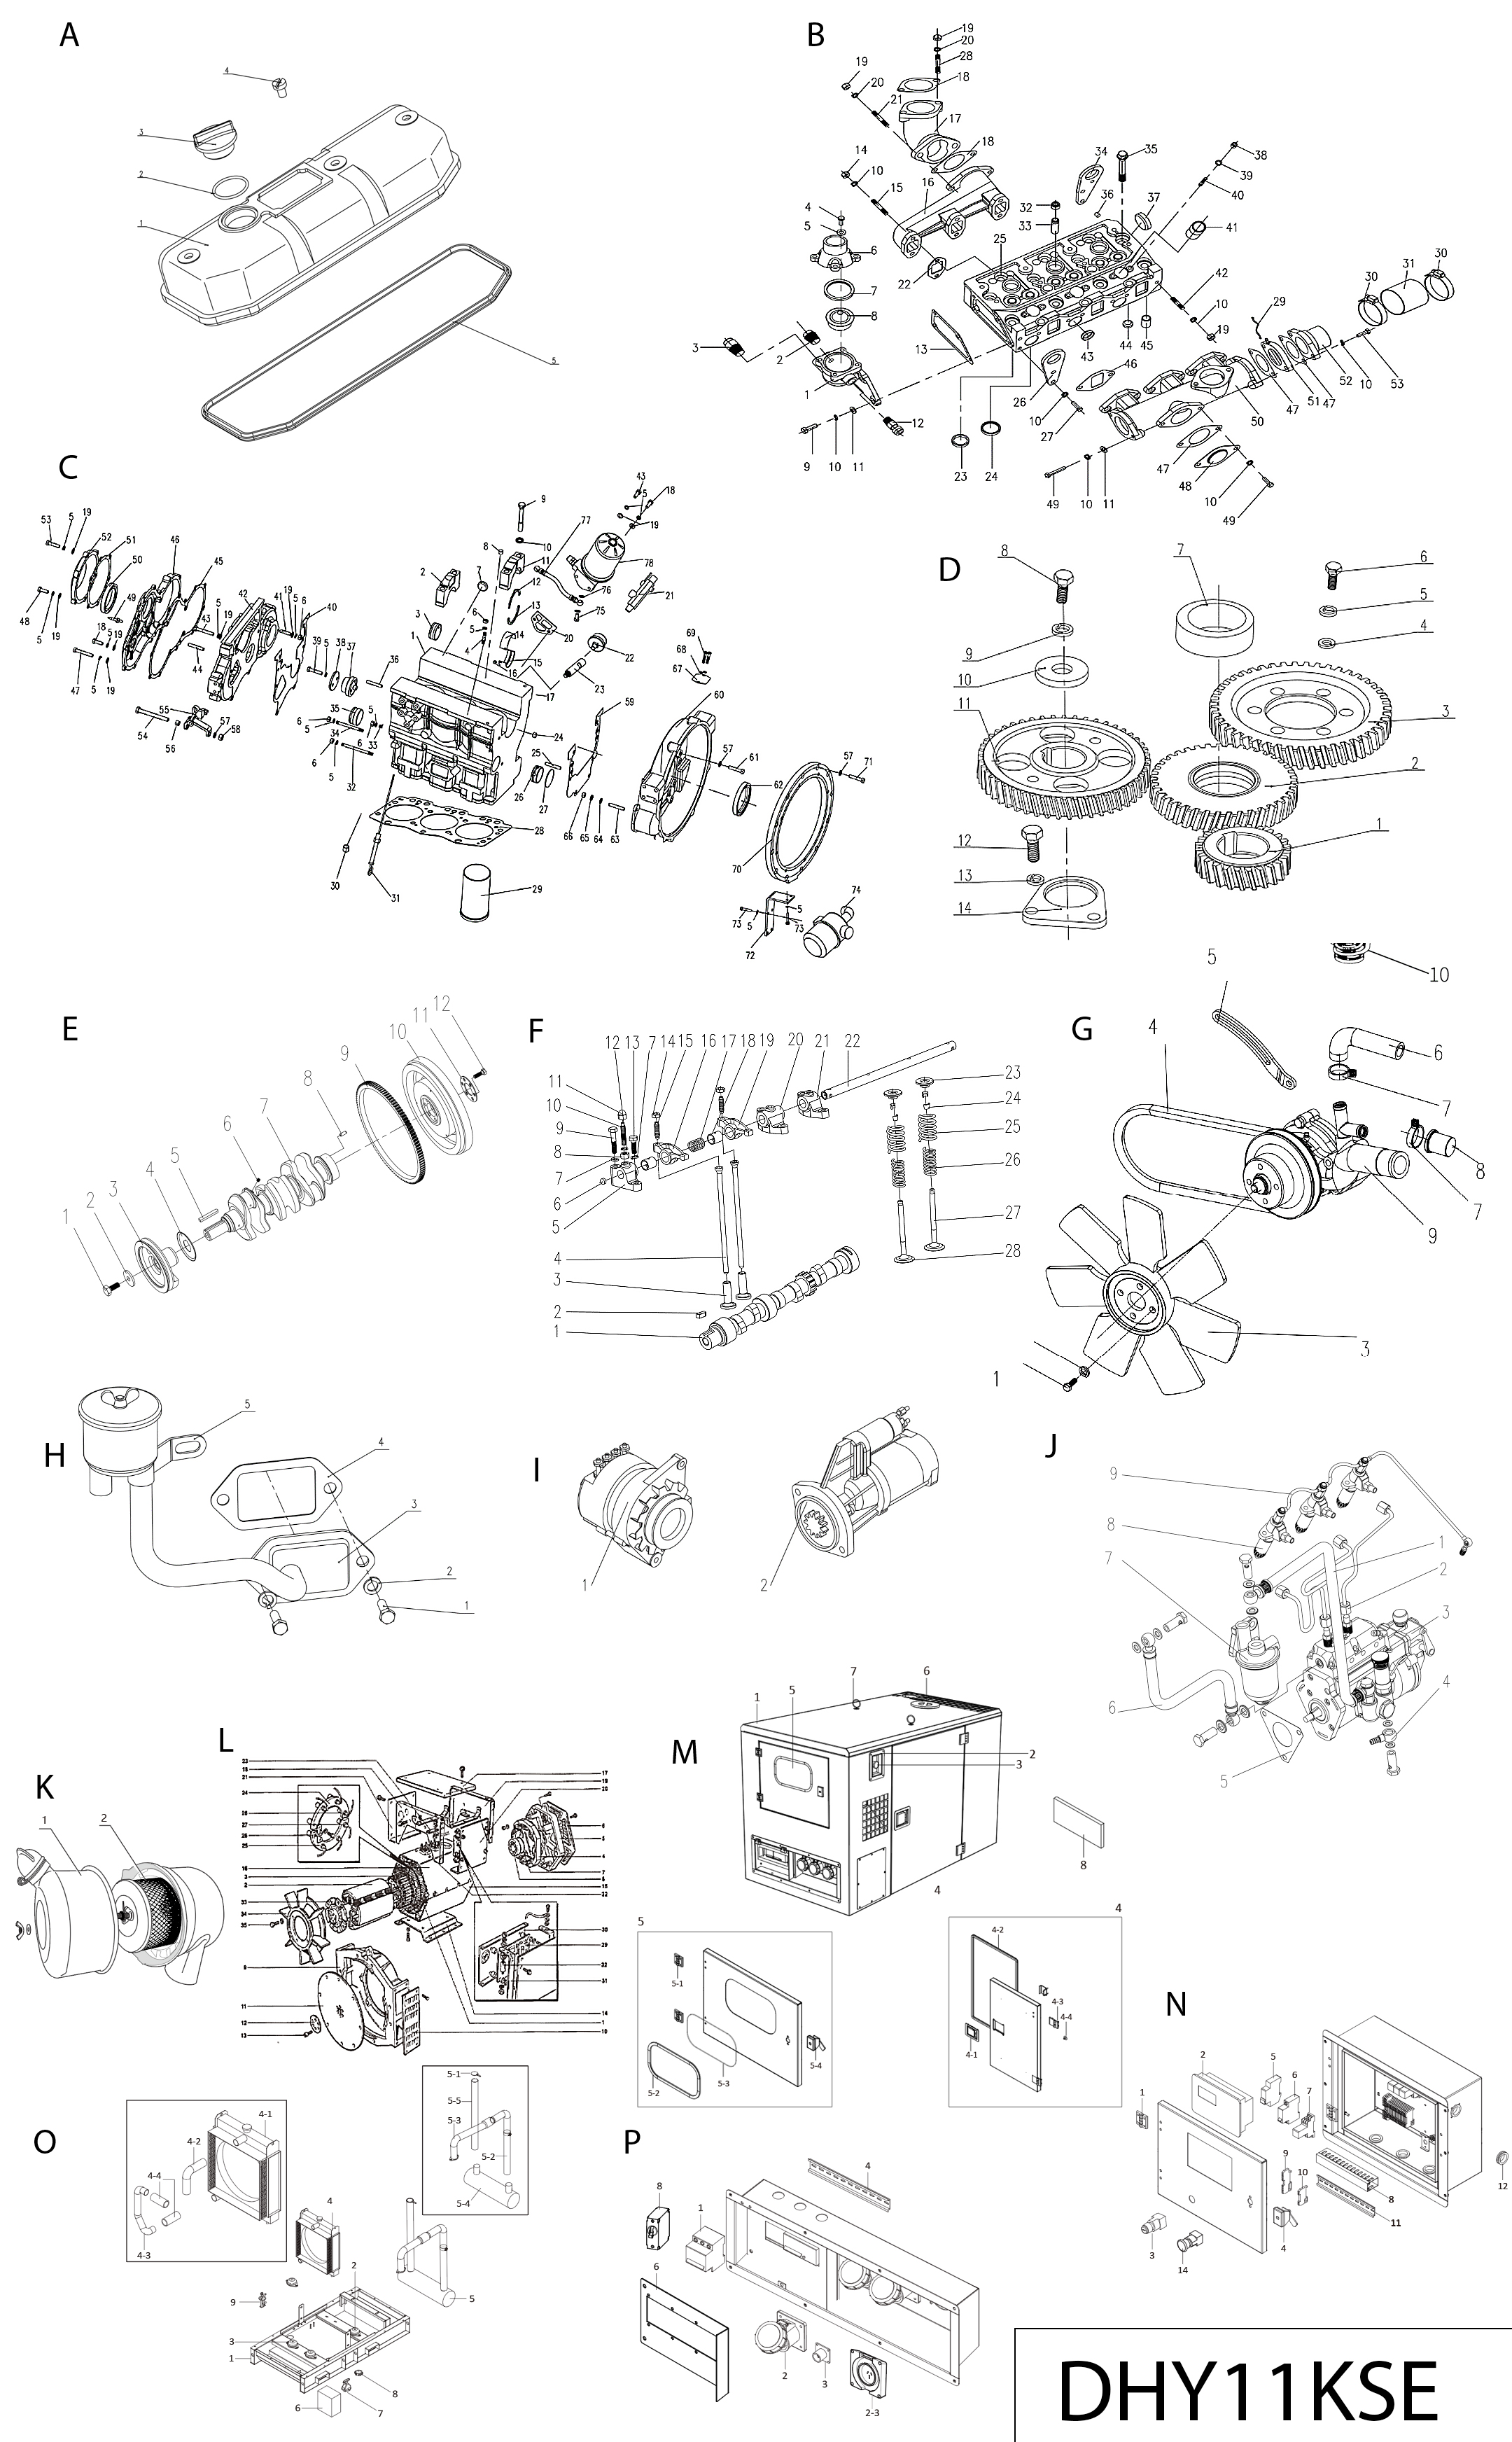 dhy11kse-exploded-view.jpg